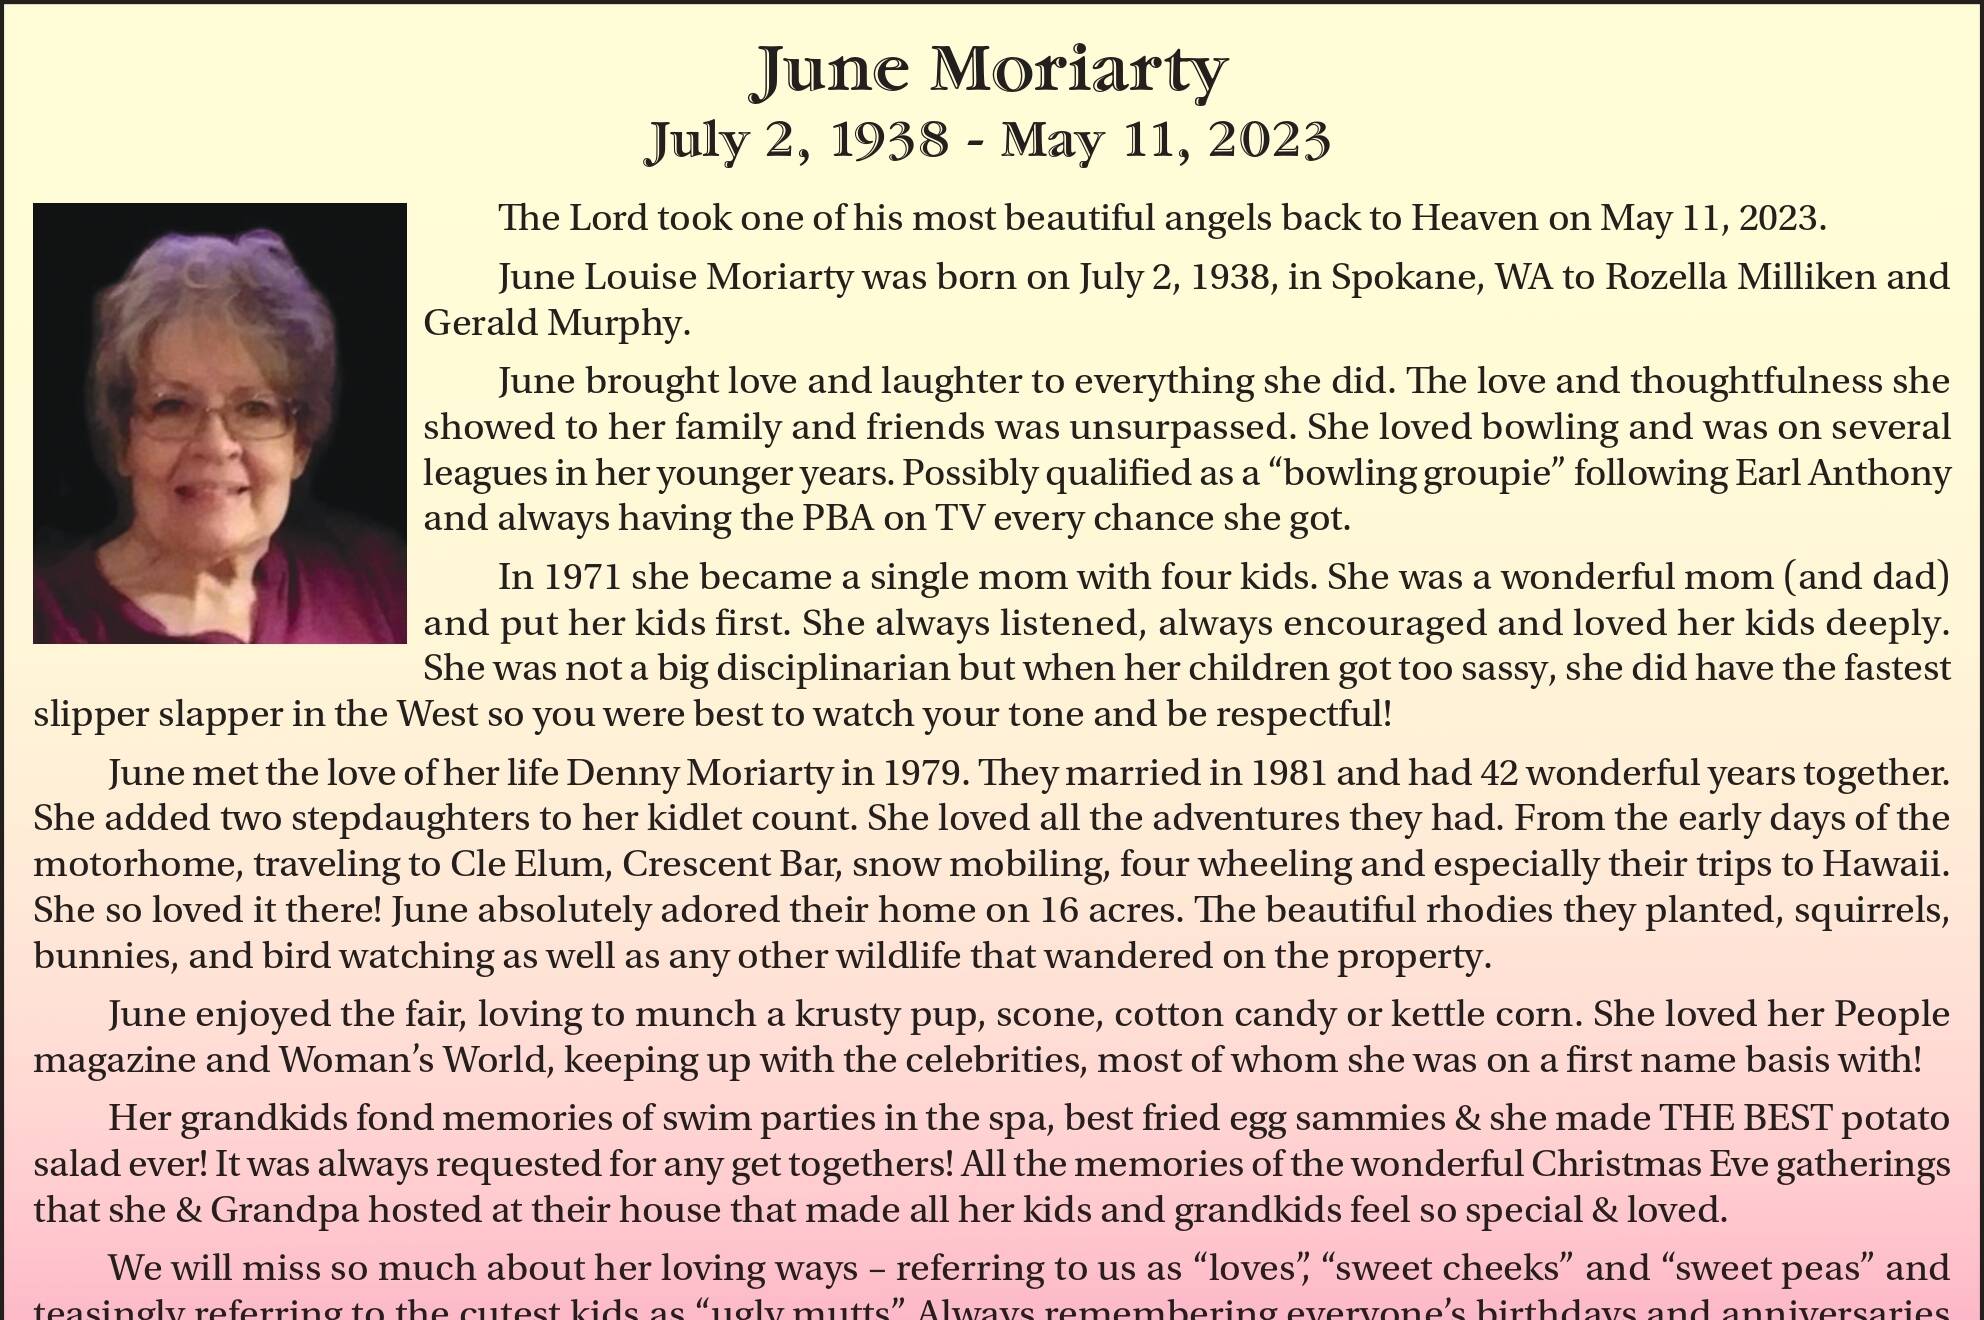 June Moriarty died May 11, 2023 at the age of 84.